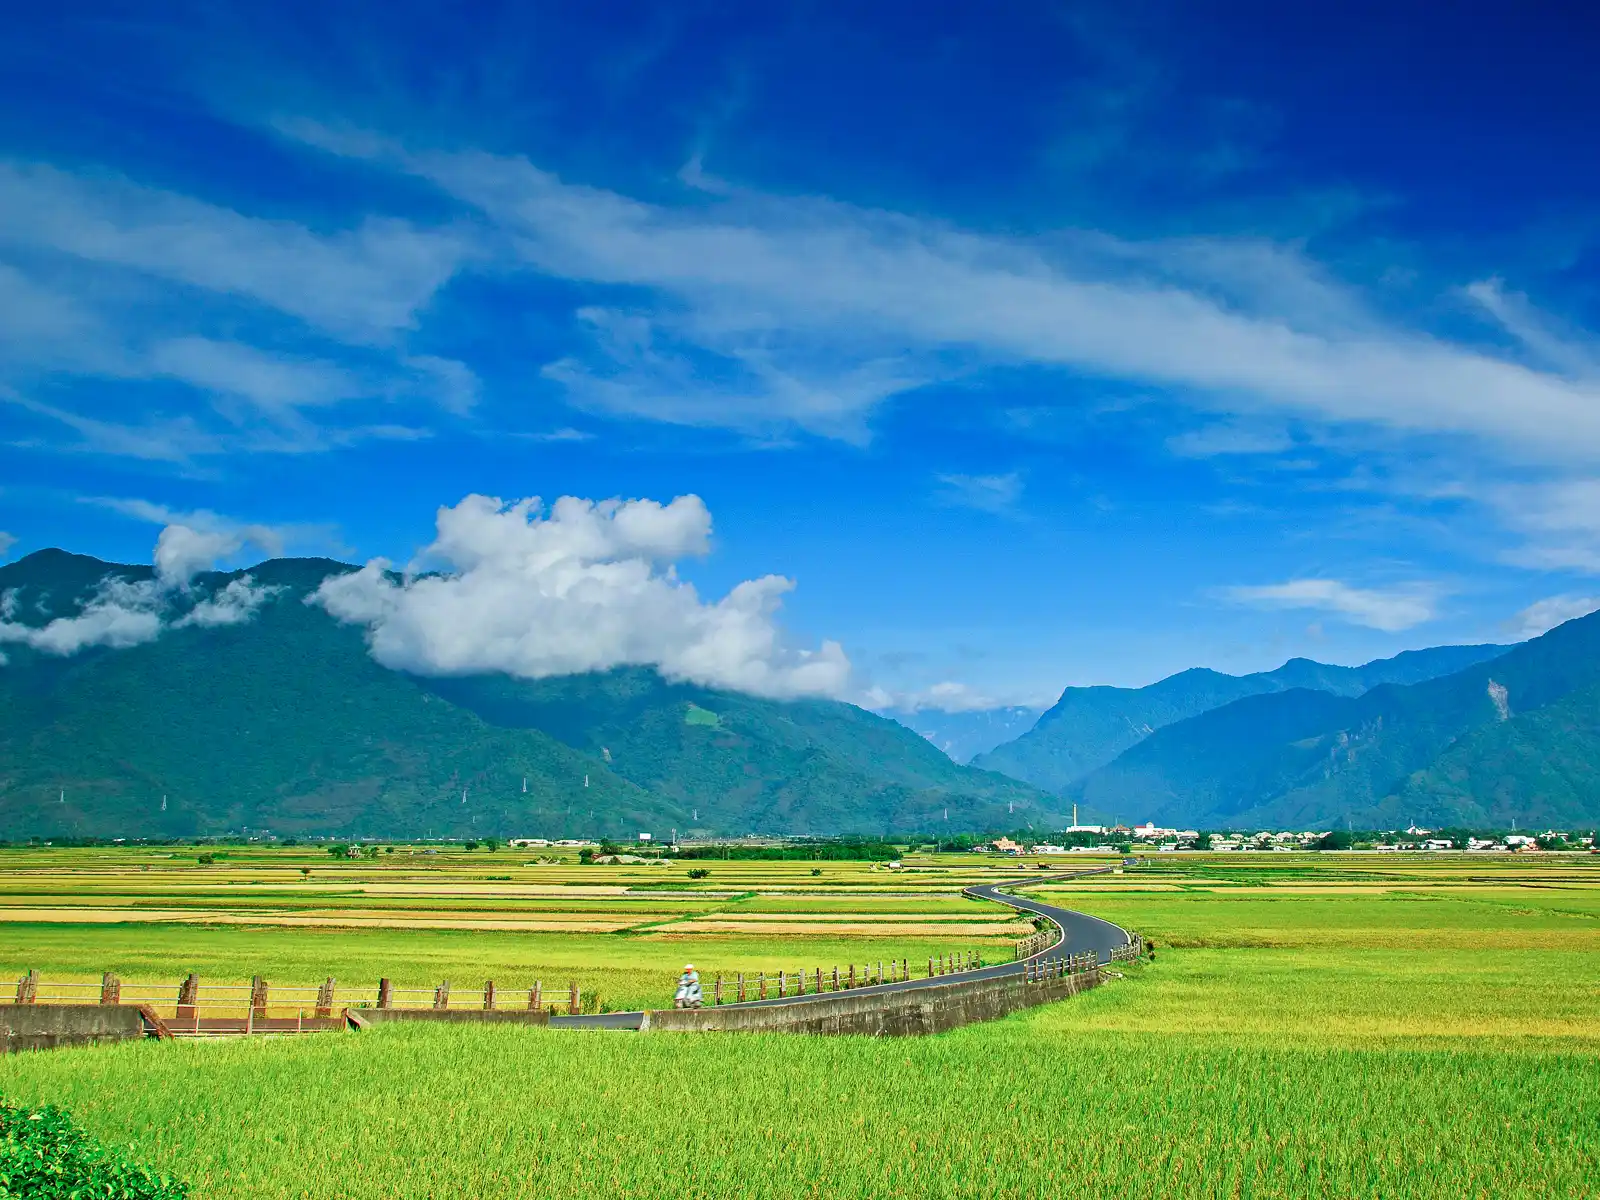 The valley is covered with a mixture of green and golden as rice fields come into full bloom.